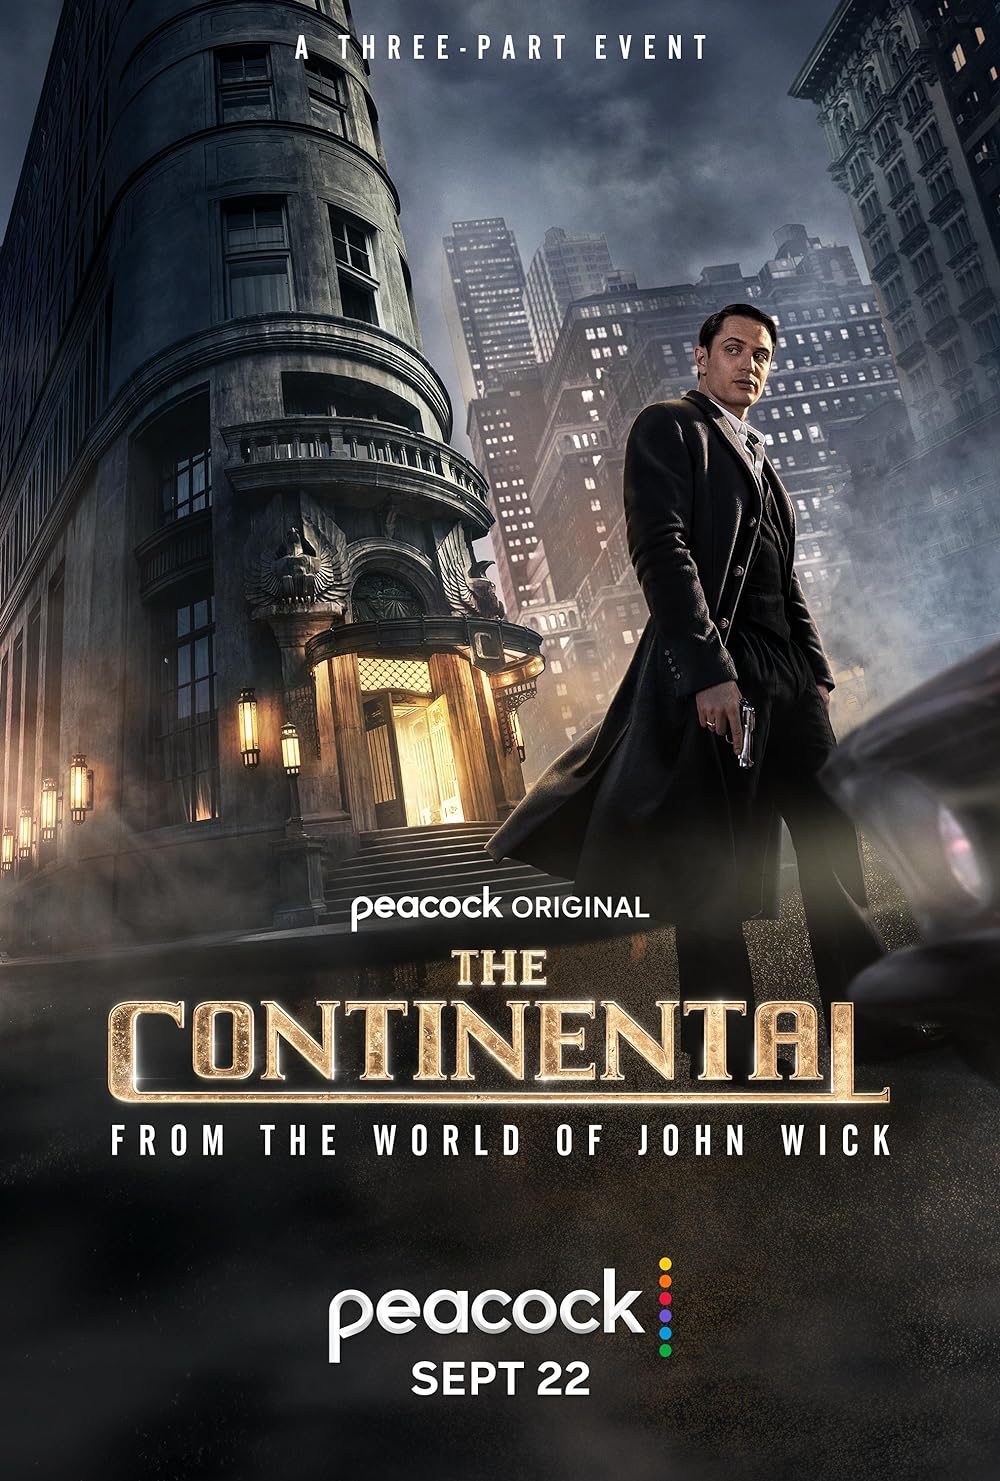 The Continental: From the World of John Wick (September 22) - Streaming on Prime Video:Prime Video takes you back to the gritty and assassin-filled world of the John Wick series with 